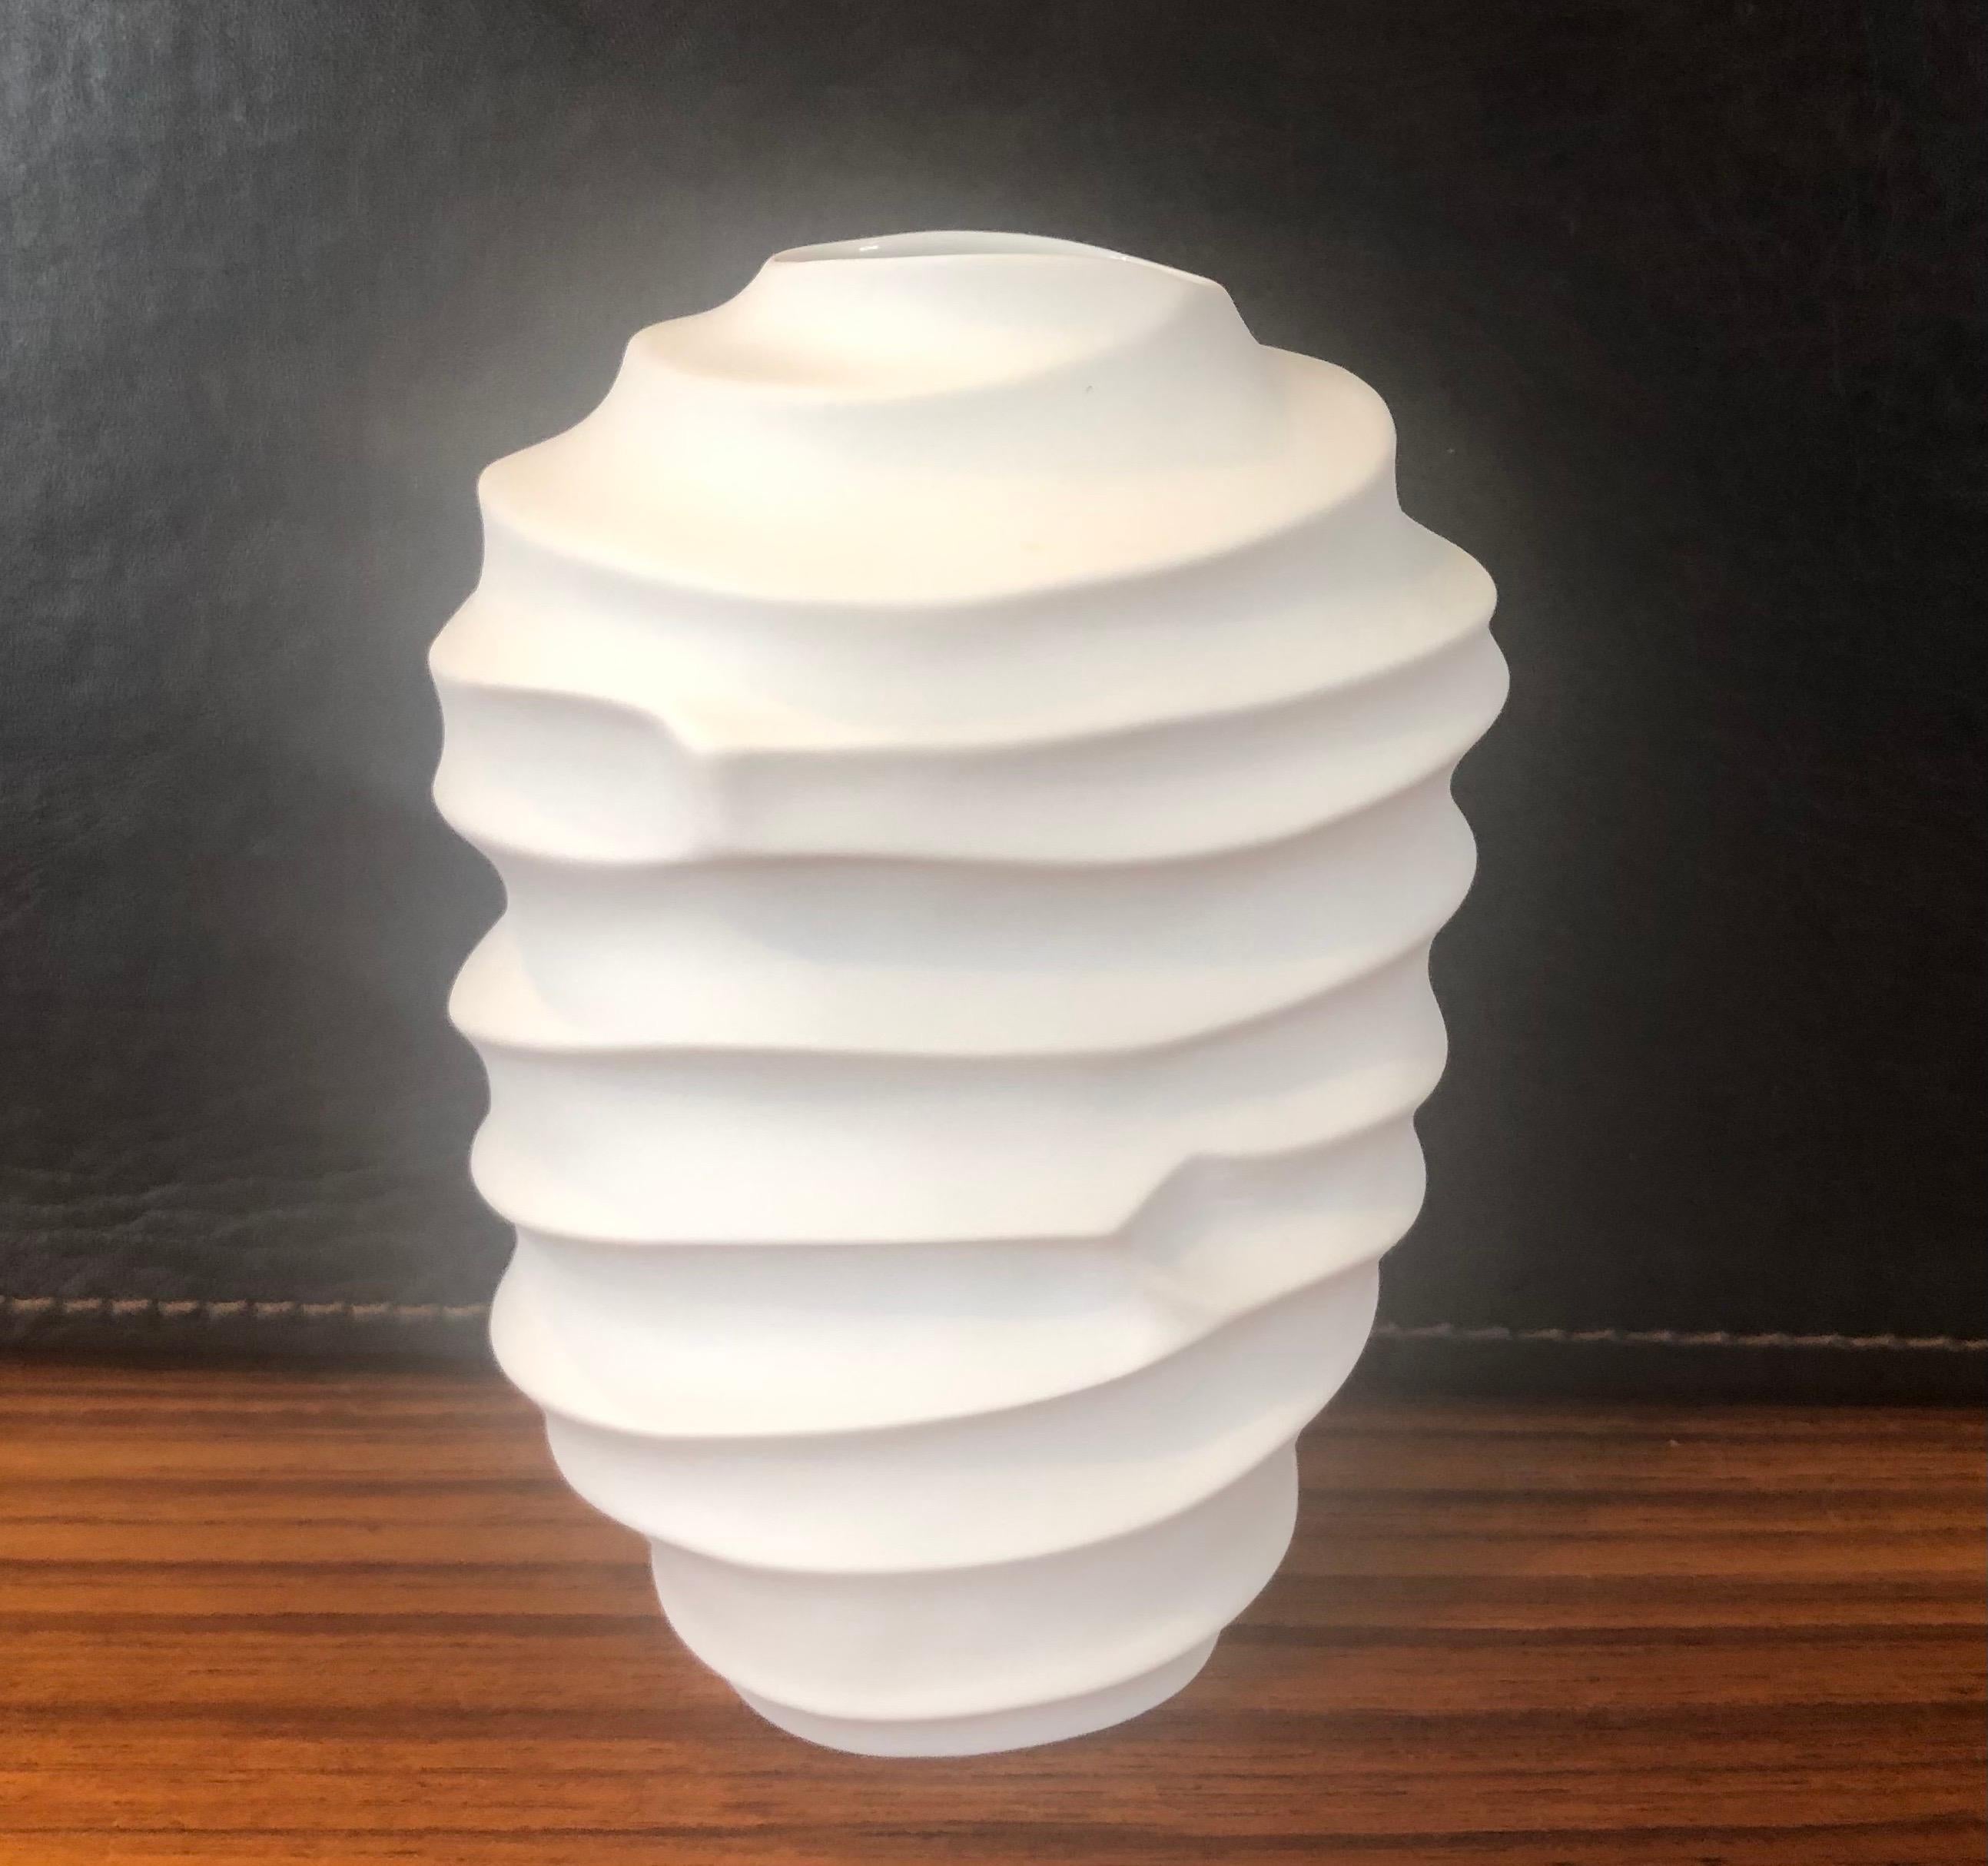 Stylish and rare Studio-Line vita grooved vase by Johann van Loon for Rosenthal, circa 1970s. The vase is made of white porcelain with a matte finish and resembles climbing waves on a stormy sea. The vase is in excellent pre-owned condition with no